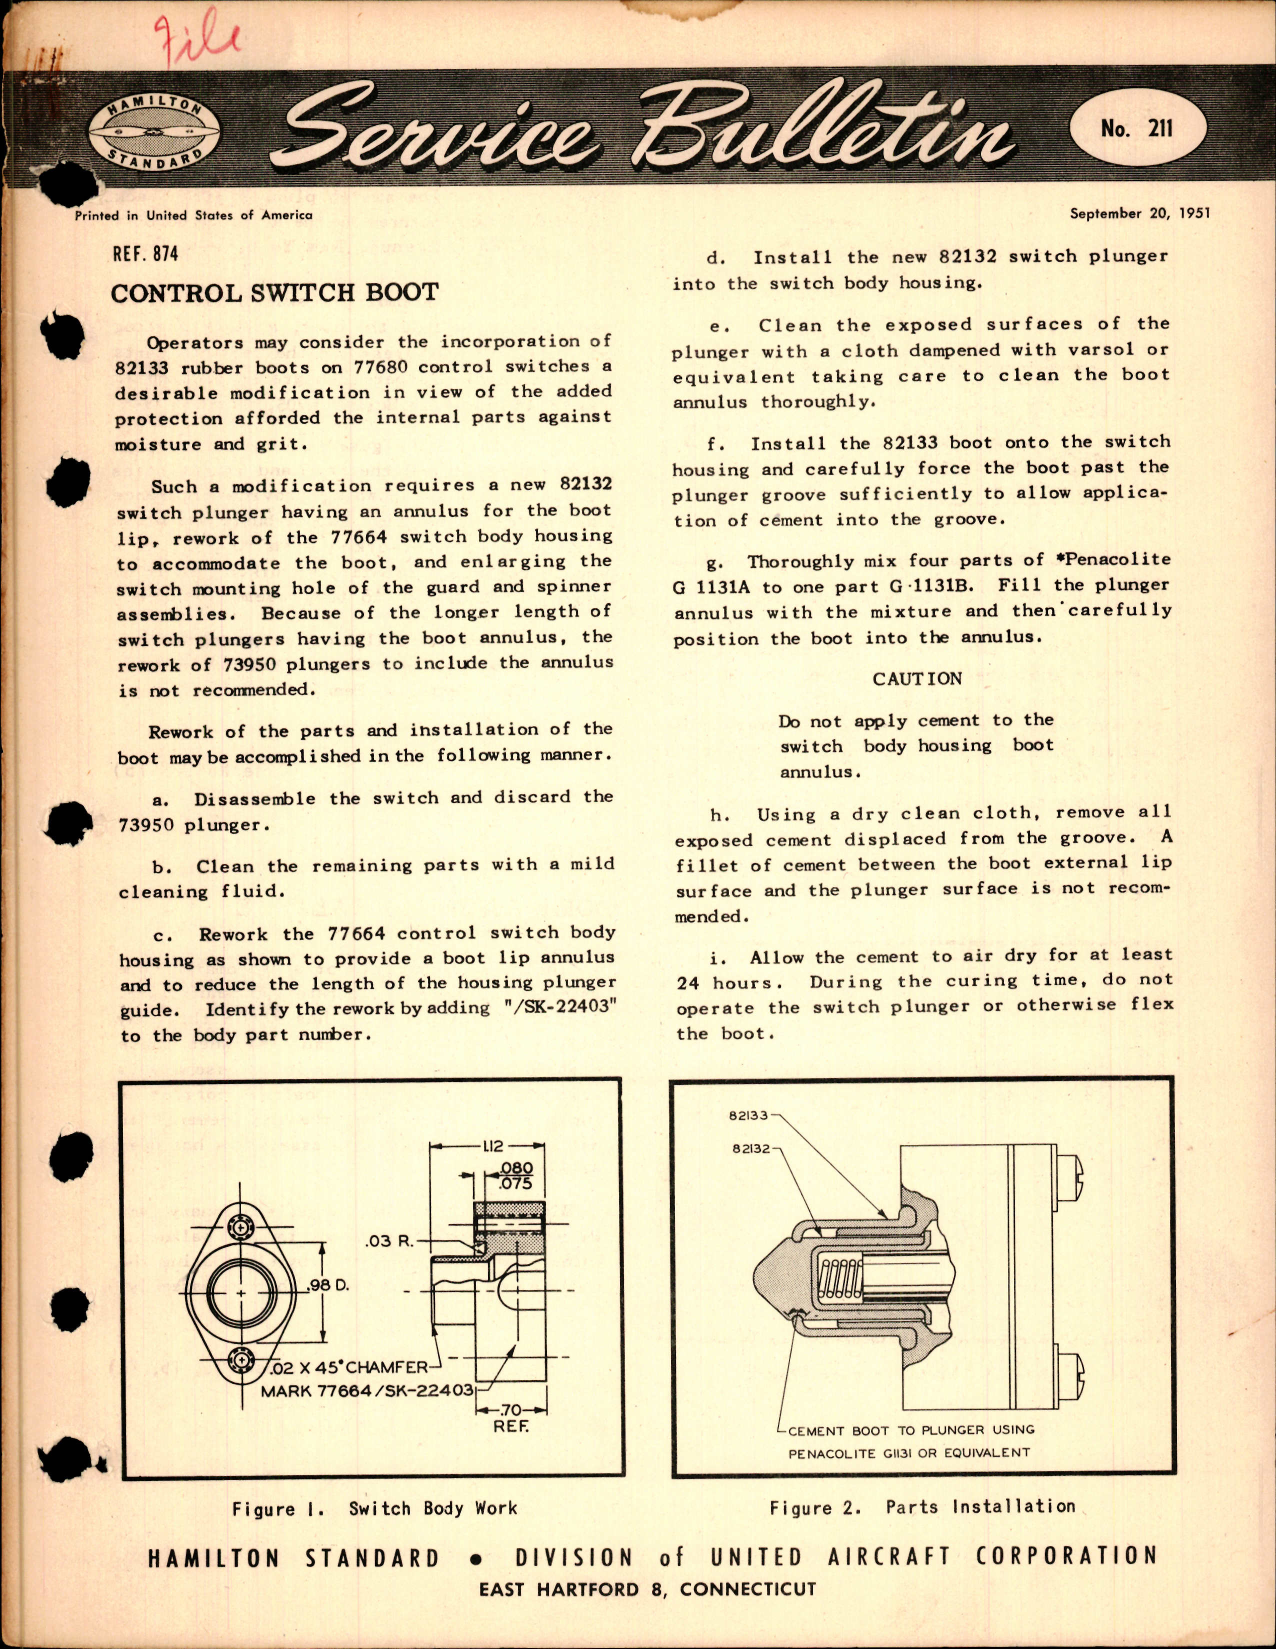 Sample page 1 from AirCorps Library document: Control Switch Boot, Ref 874